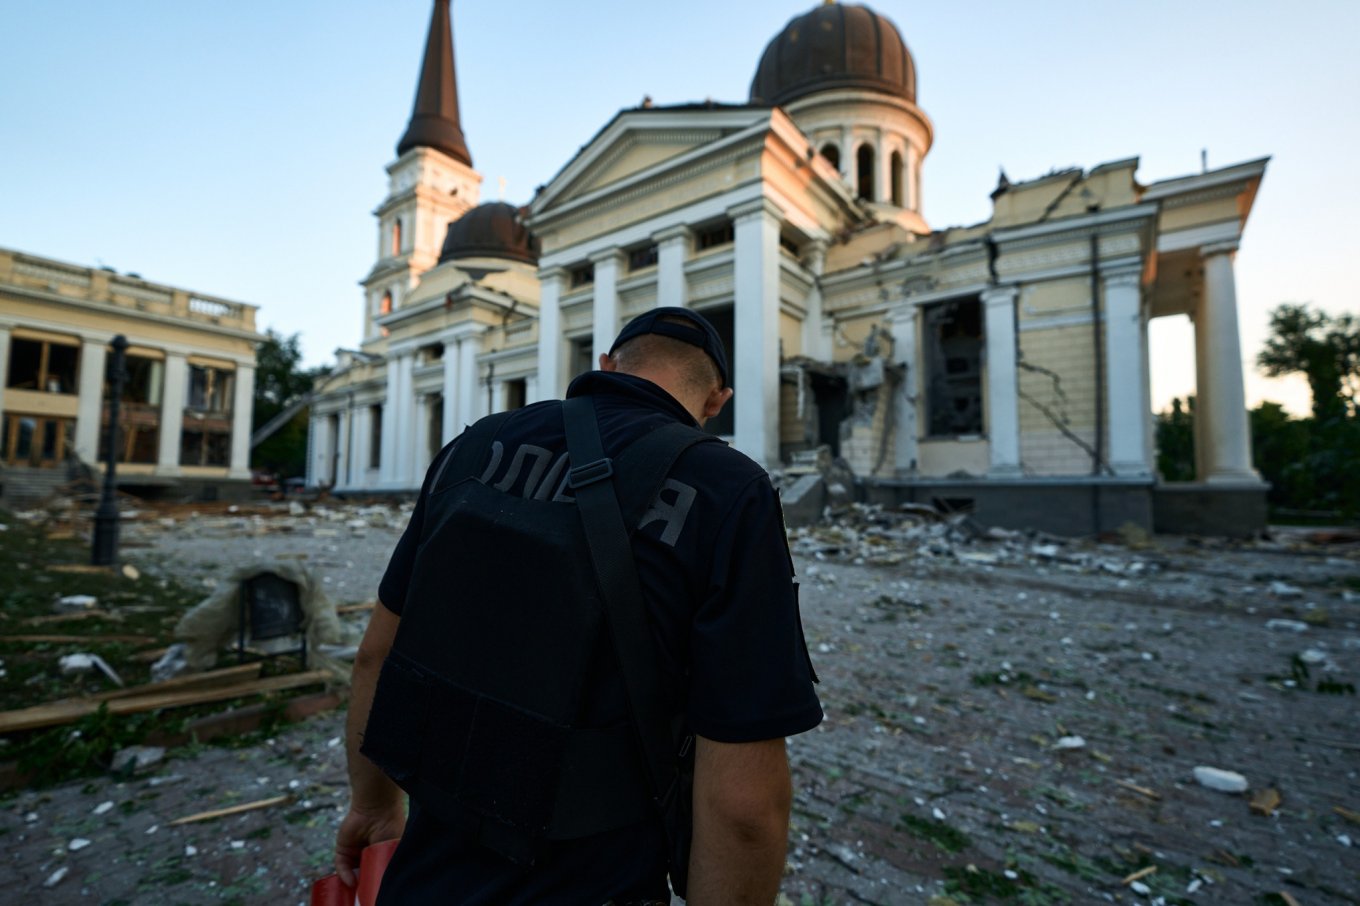 rUssians Attack Odesa, Hit Historical Center, Destroy Cathedral, Zelensky Says Ukraine Will Deliver Response to the Terrorists, Defense Express